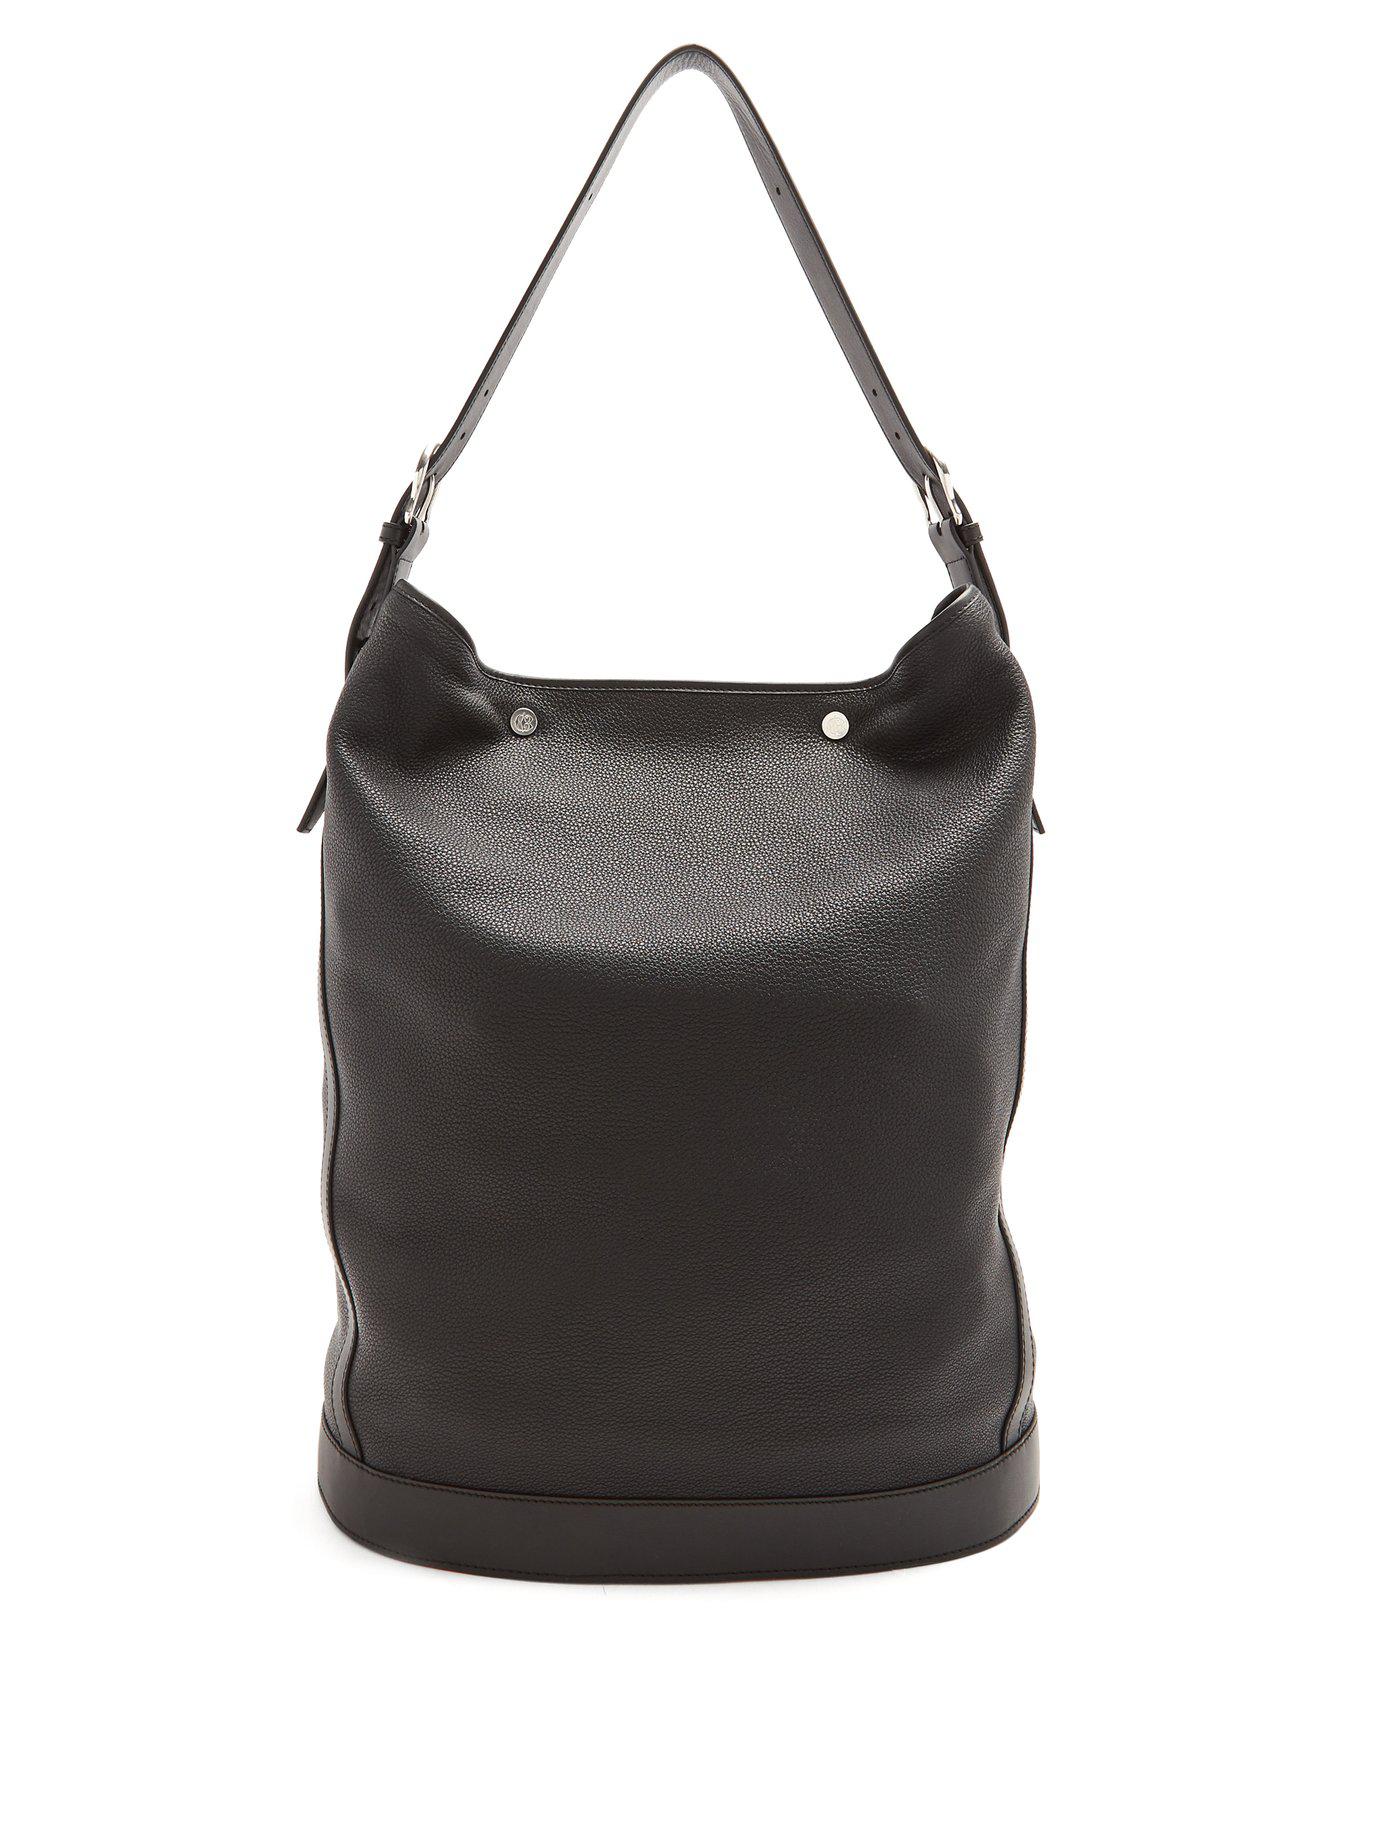 CONNOLLY 1985 Leather Bucket Bag in Black - Lyst